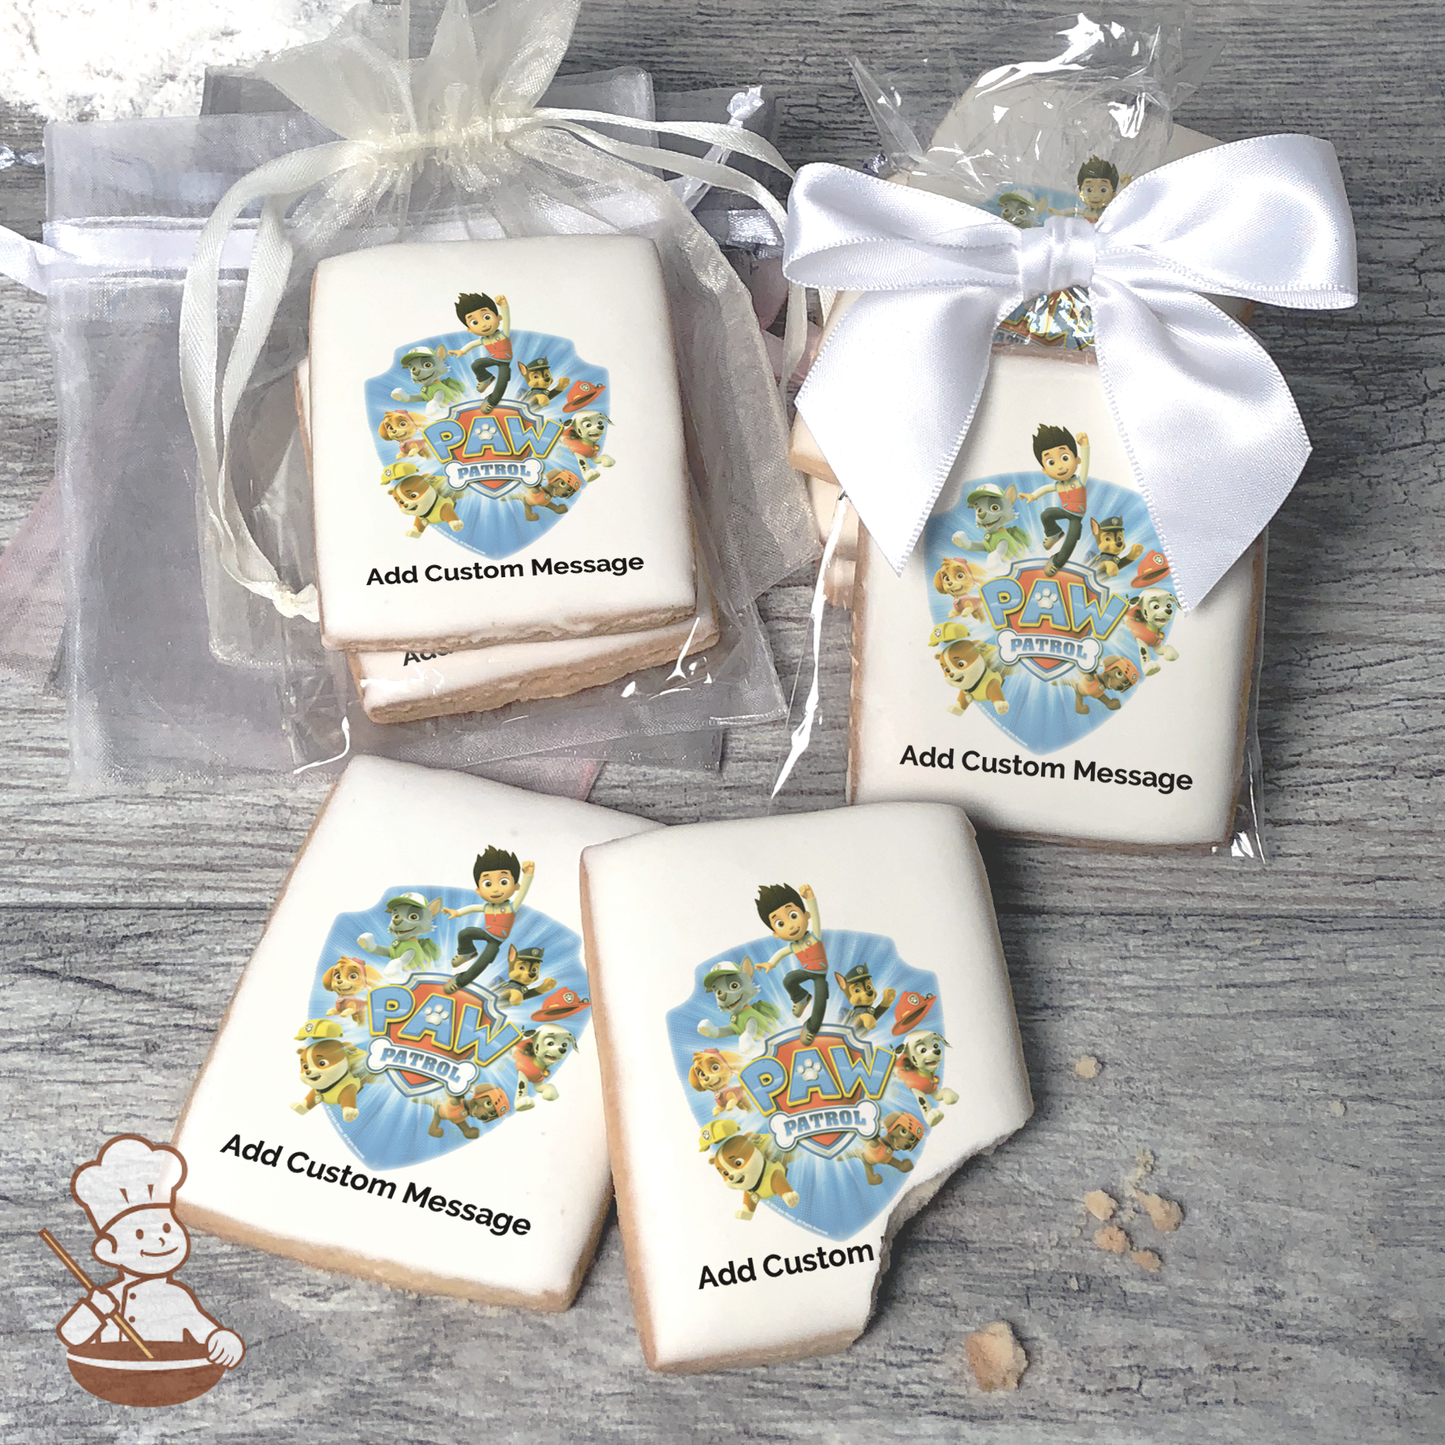 PAW Patrol Yelp for Help Custom Message Cookies (Rectangle)